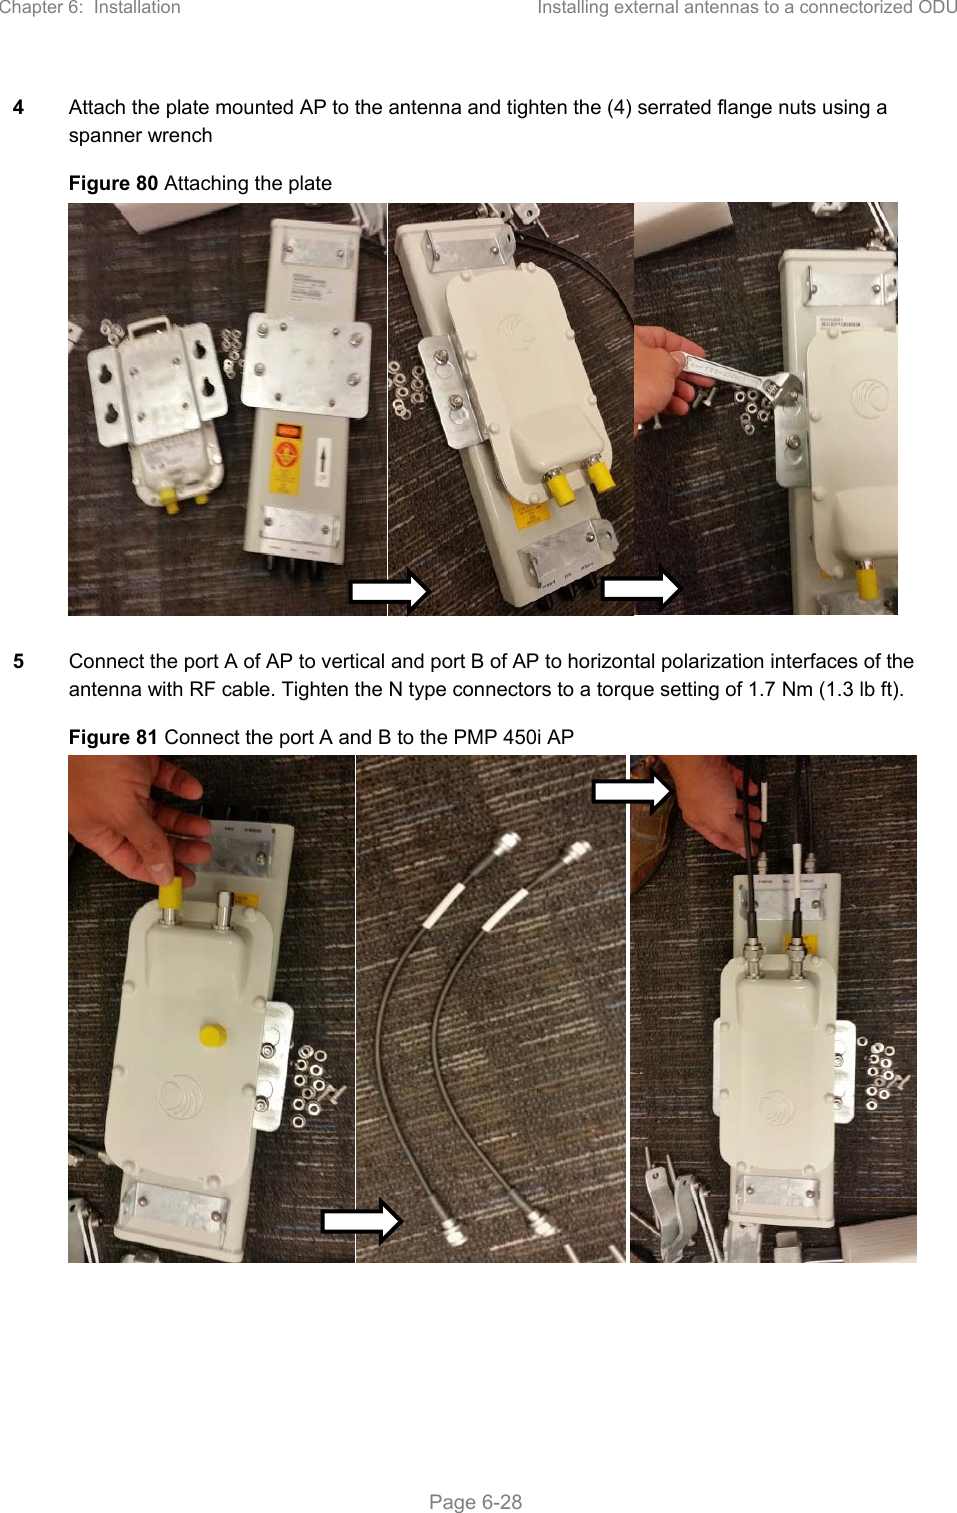 Chapter 6:  Installation  Installing external antennas to a connectorized ODU   Page 6-28 4  Attach the plate mounted AP to the antenna and tighten the (4) serrated flange nuts using a spanner wrench Figure 80 Attaching the plate  5  Connect the port A of AP to vertical and port B of AP to horizontal polarization interfaces of the antenna with RF cable. Tighten the N type connectors to a torque setting of 1.7 Nm (1.3 lb ft). Figure 81 Connect the port A and B to the PMP 450i AP 